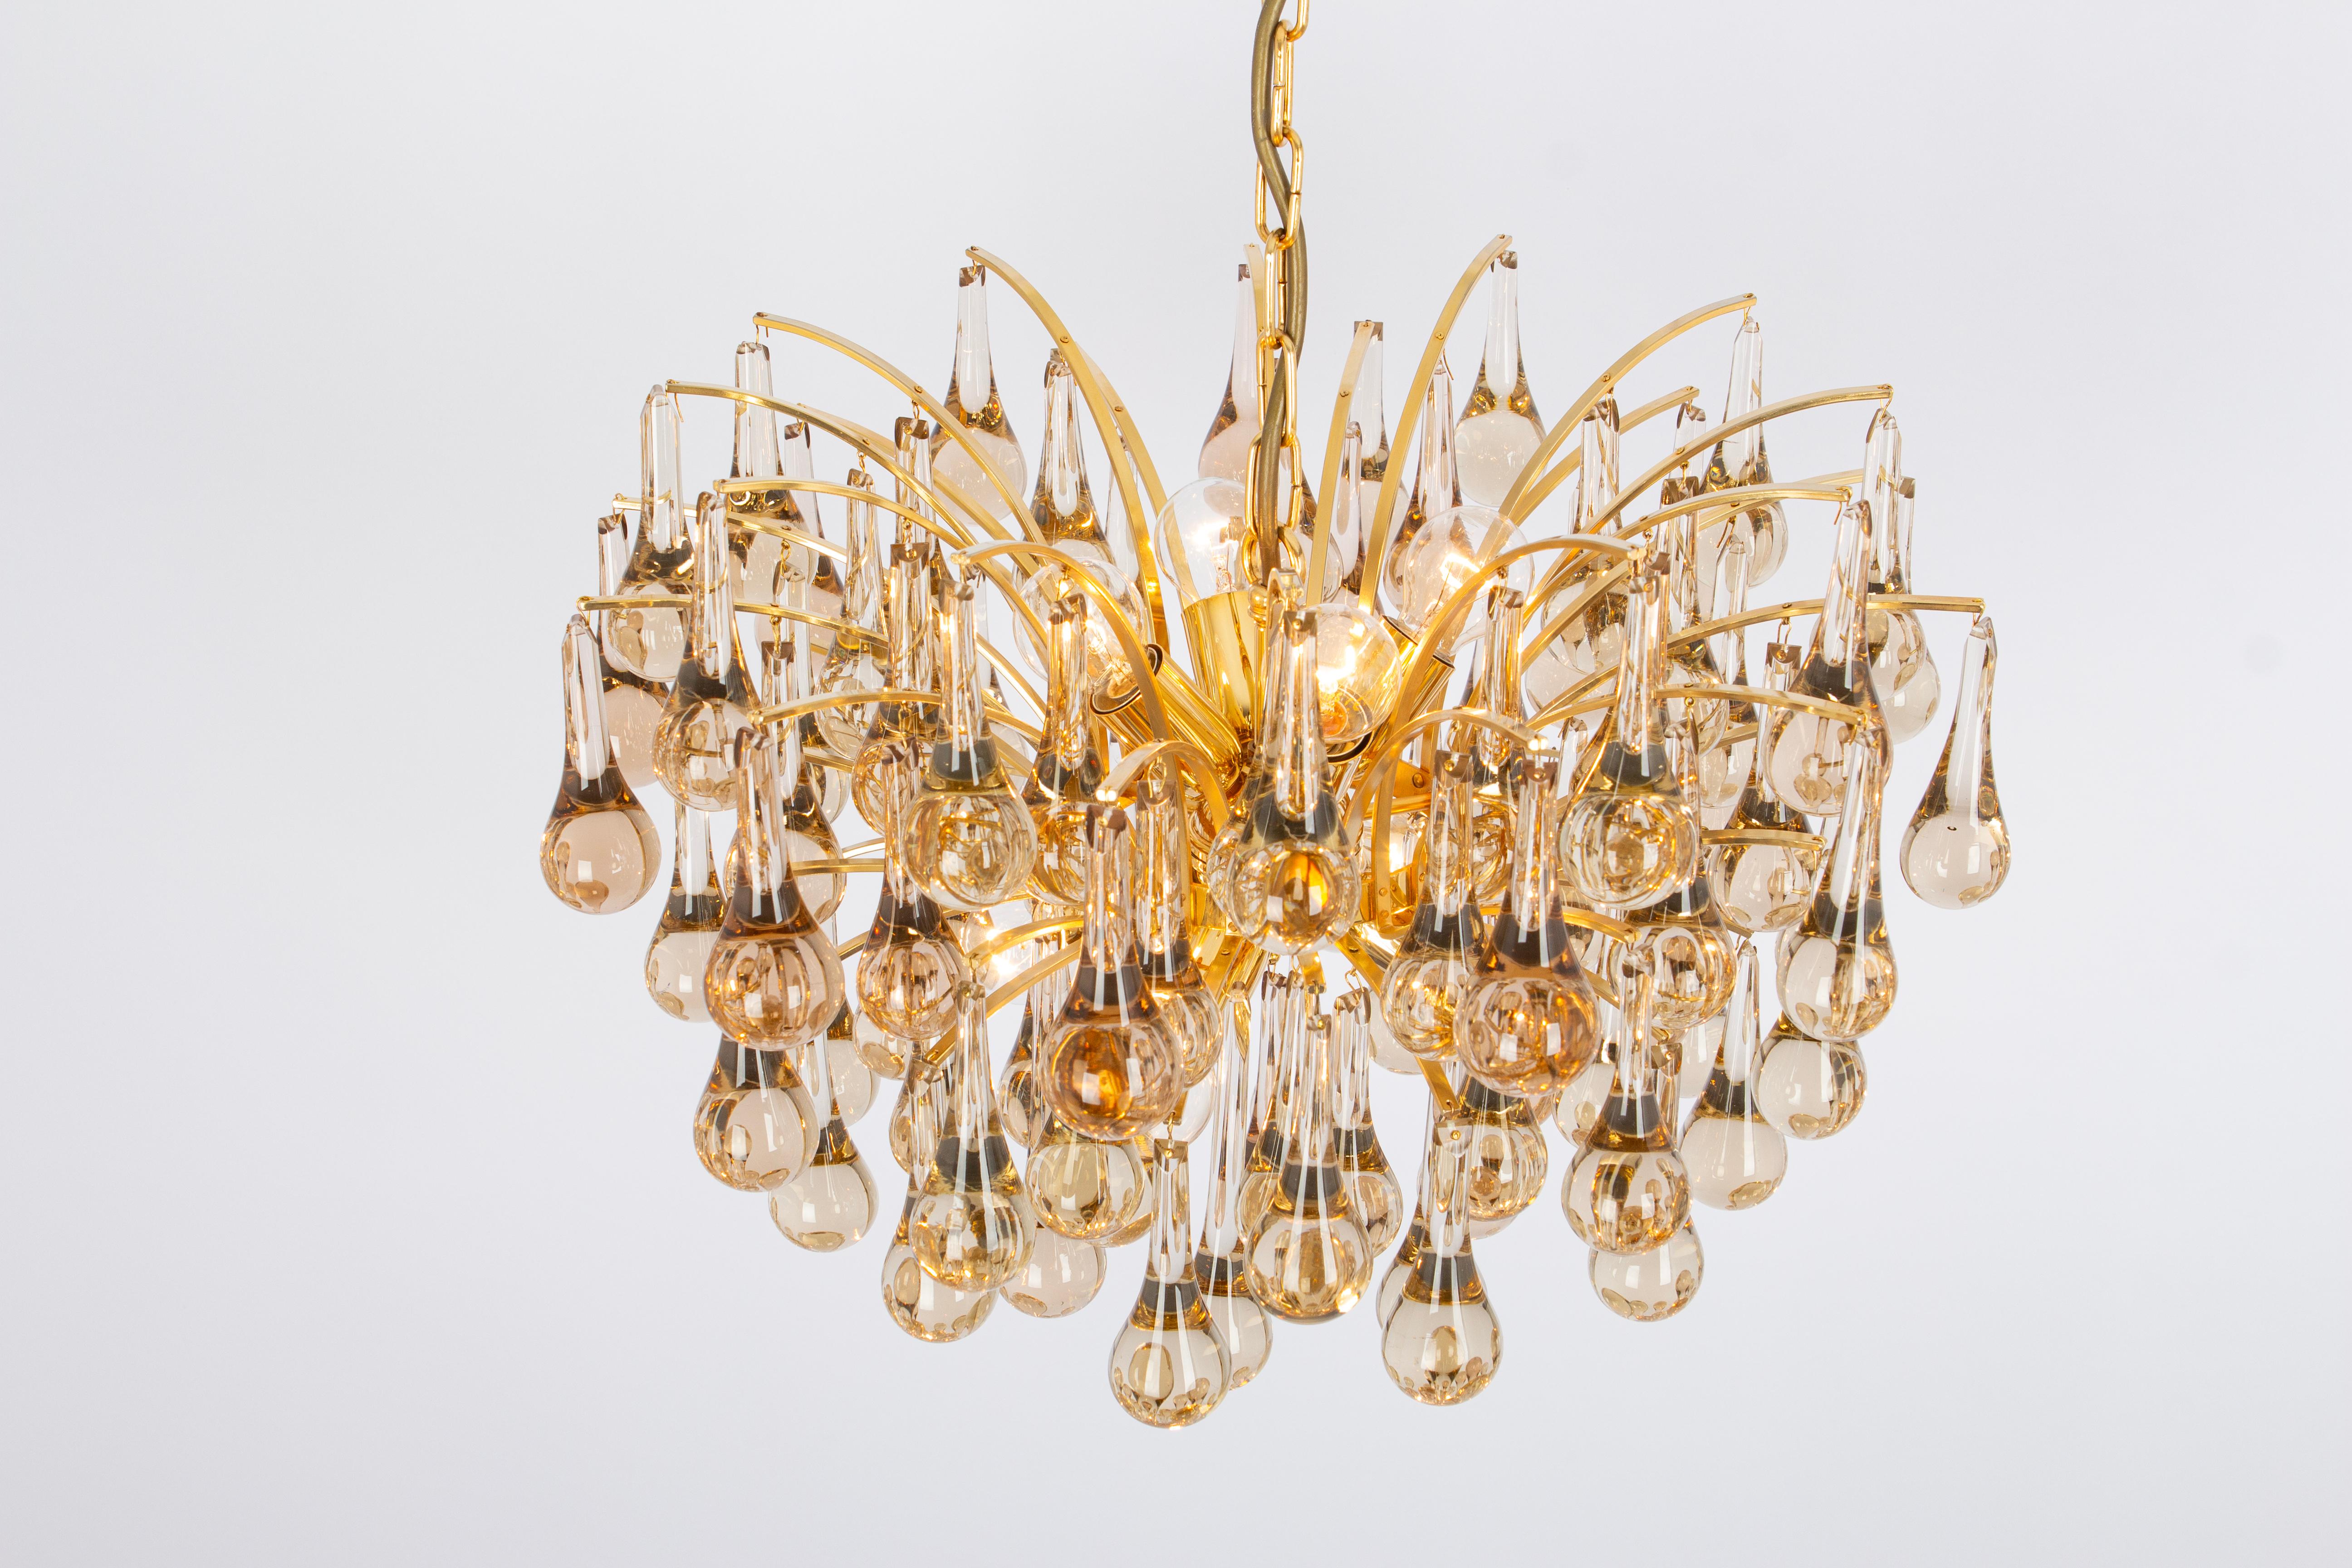 Large Murano Glass Tear Drop Chandelier, Christoph Palme, Germany, 1970s For Sale 1